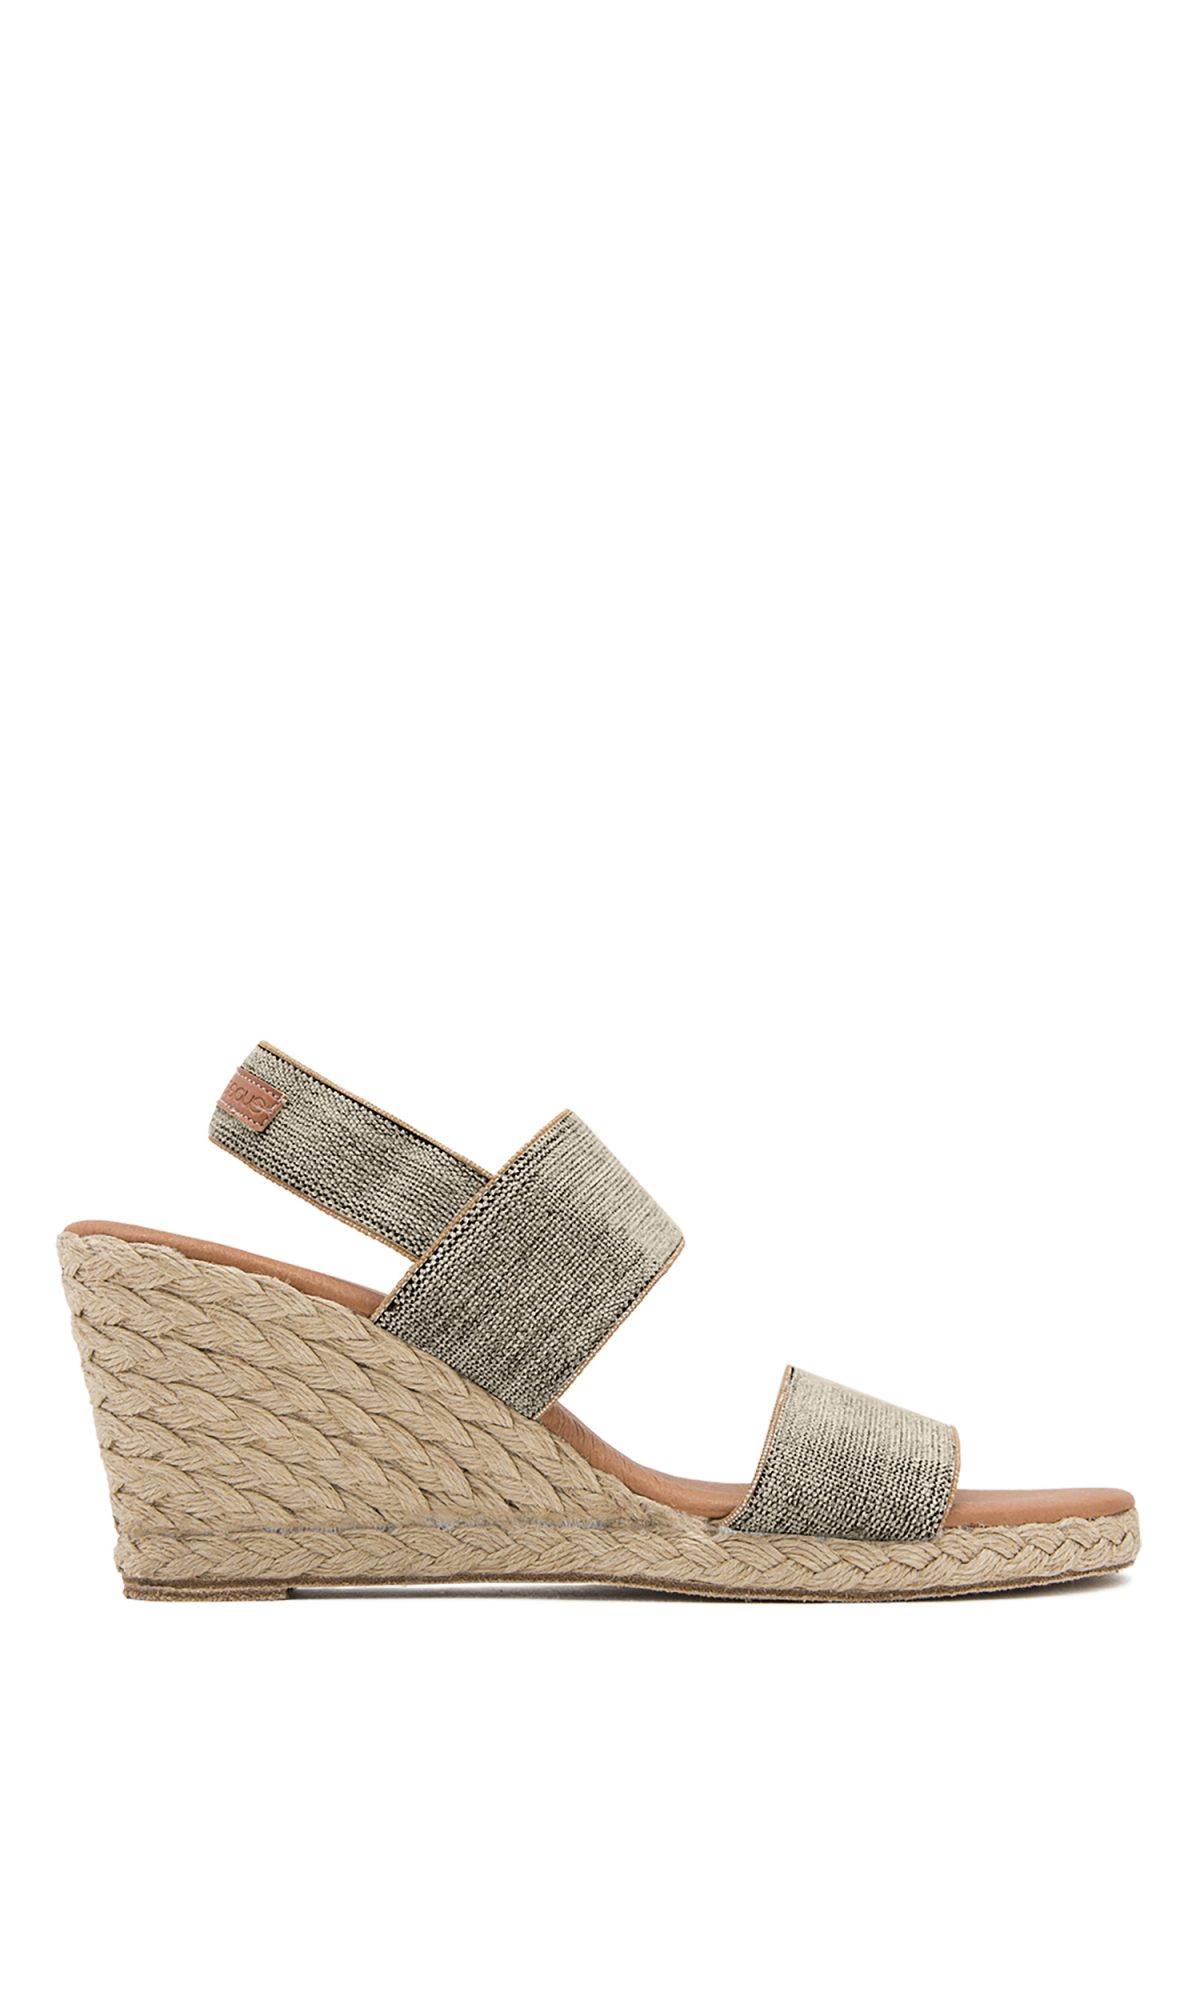 Andre Assou Allison Espadrille Wedge with Elastic Band with Backstrap| Ooh Ooh Shoes woman's clothing & shoe boutique naples, charleston and mashpee